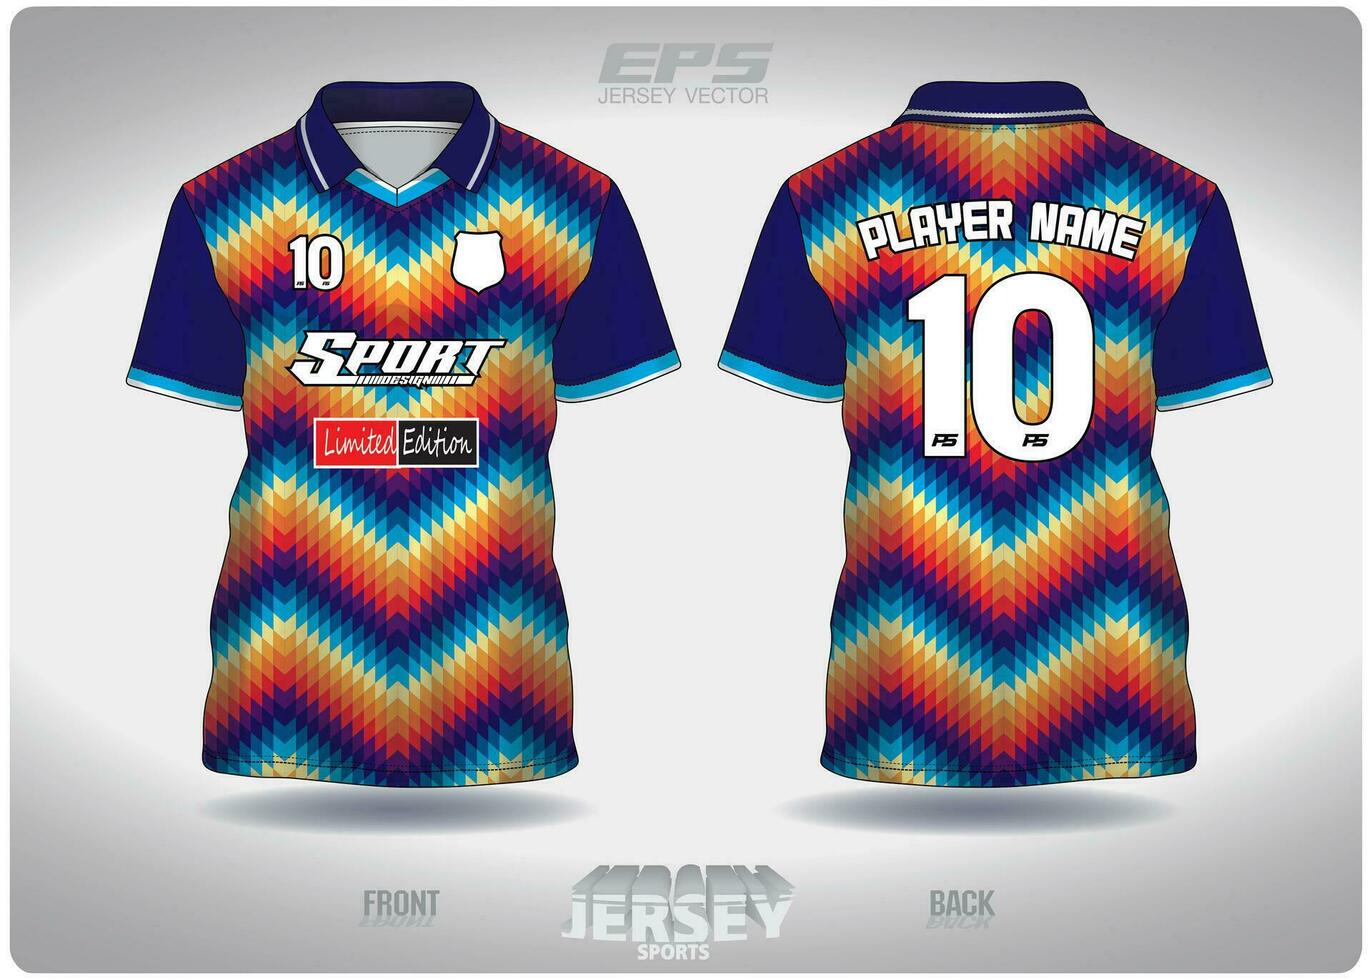 EPS jersey sports shirt vector.rainbow wavy pattern design, illustration, textile background for V-neck poloshirt, football jersey poloshirt vector